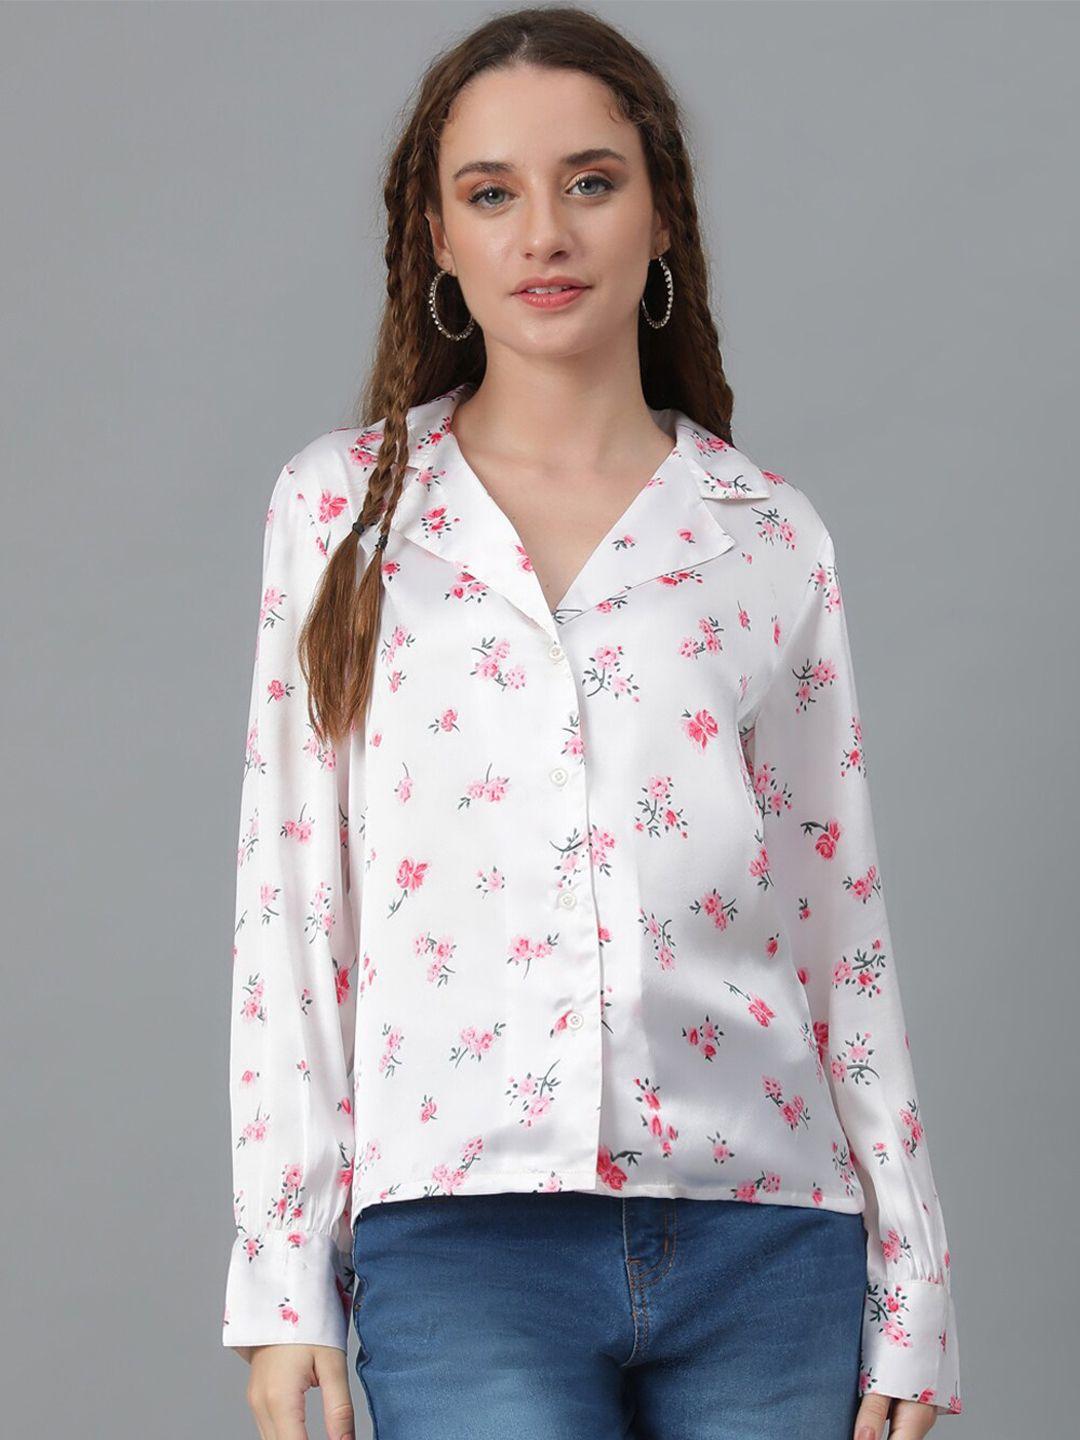 kotty white & pink relaxed floral printed cuban collar satin casual shirt